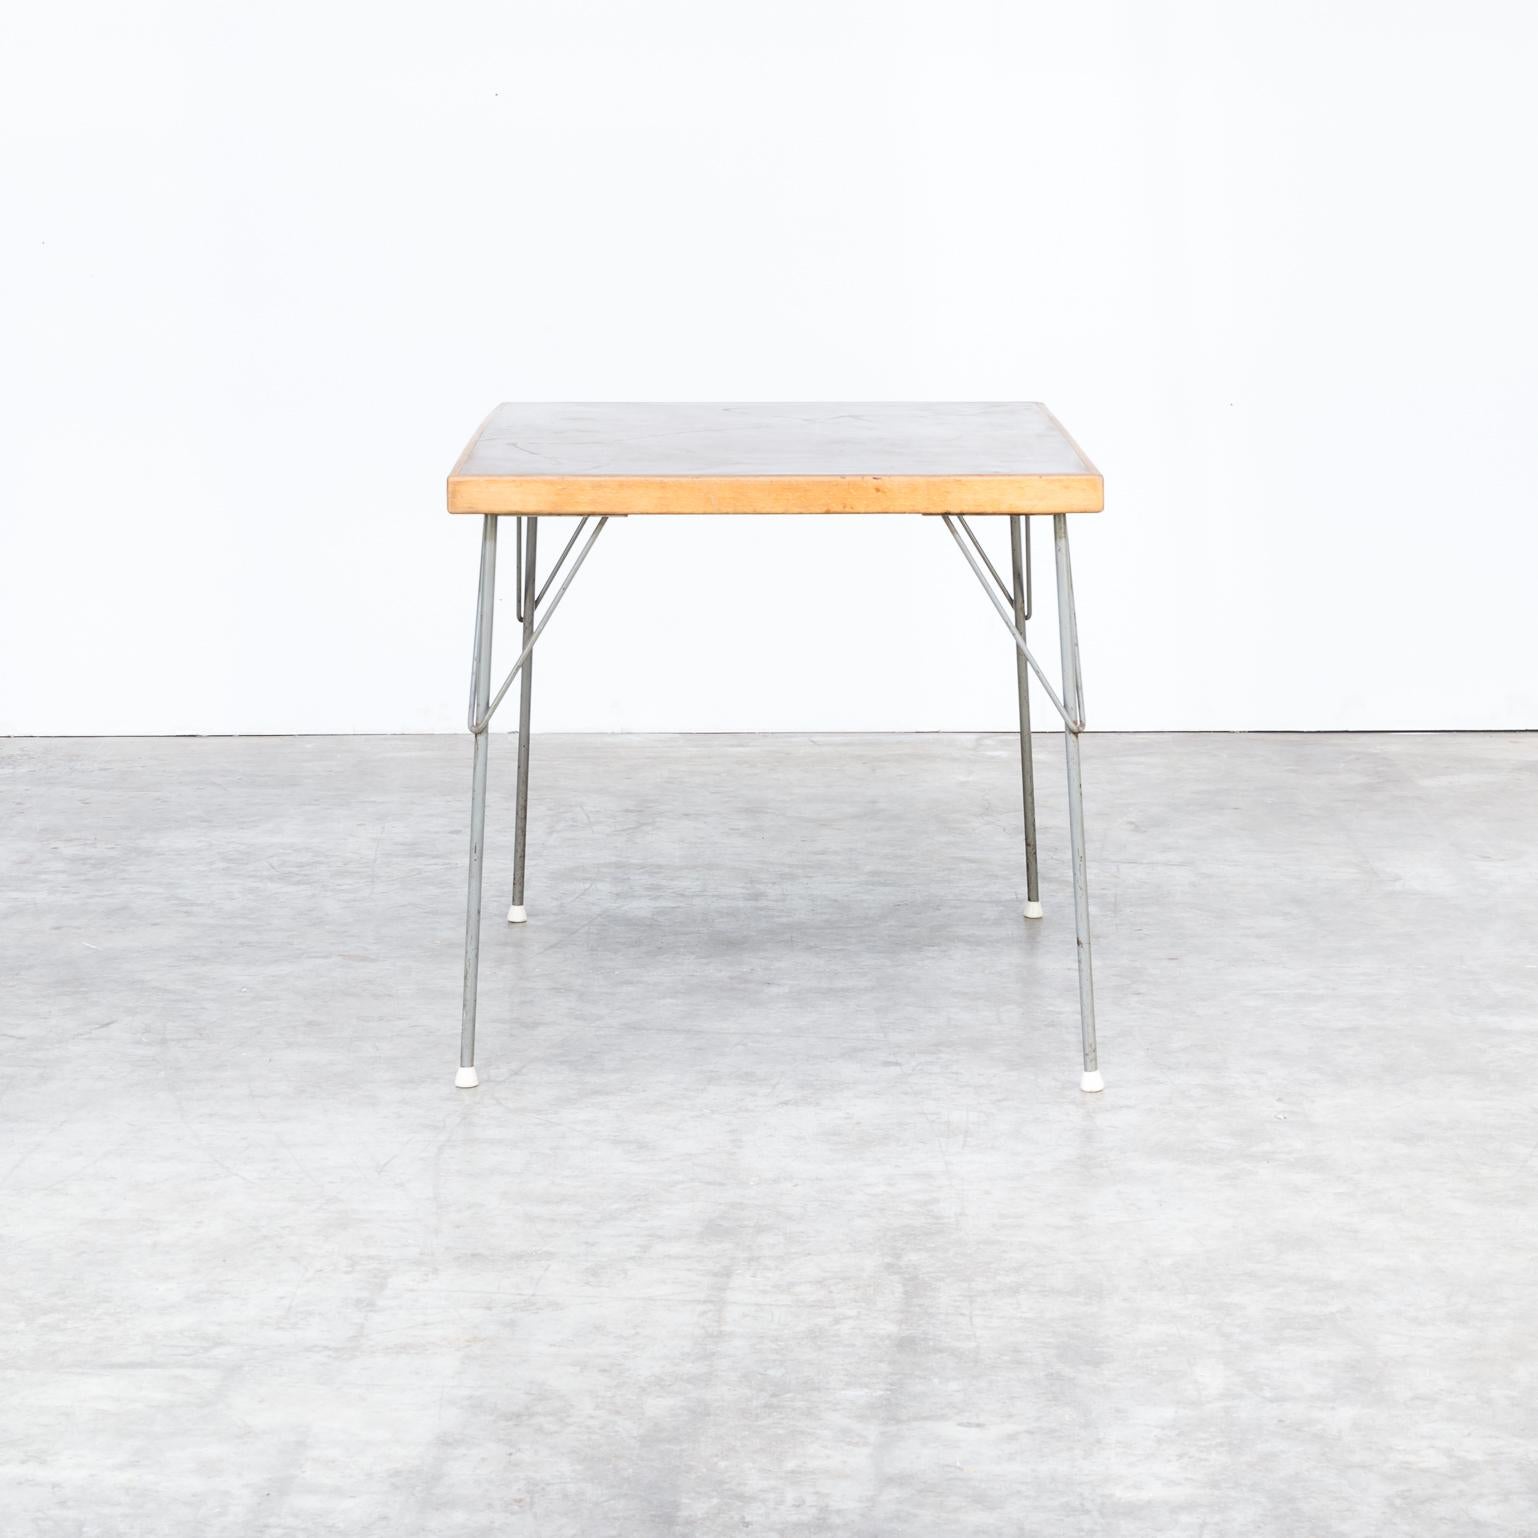 Mid-20th Century 1950s Wim Rietveld Model 530 Dining Table for Gispen For Sale